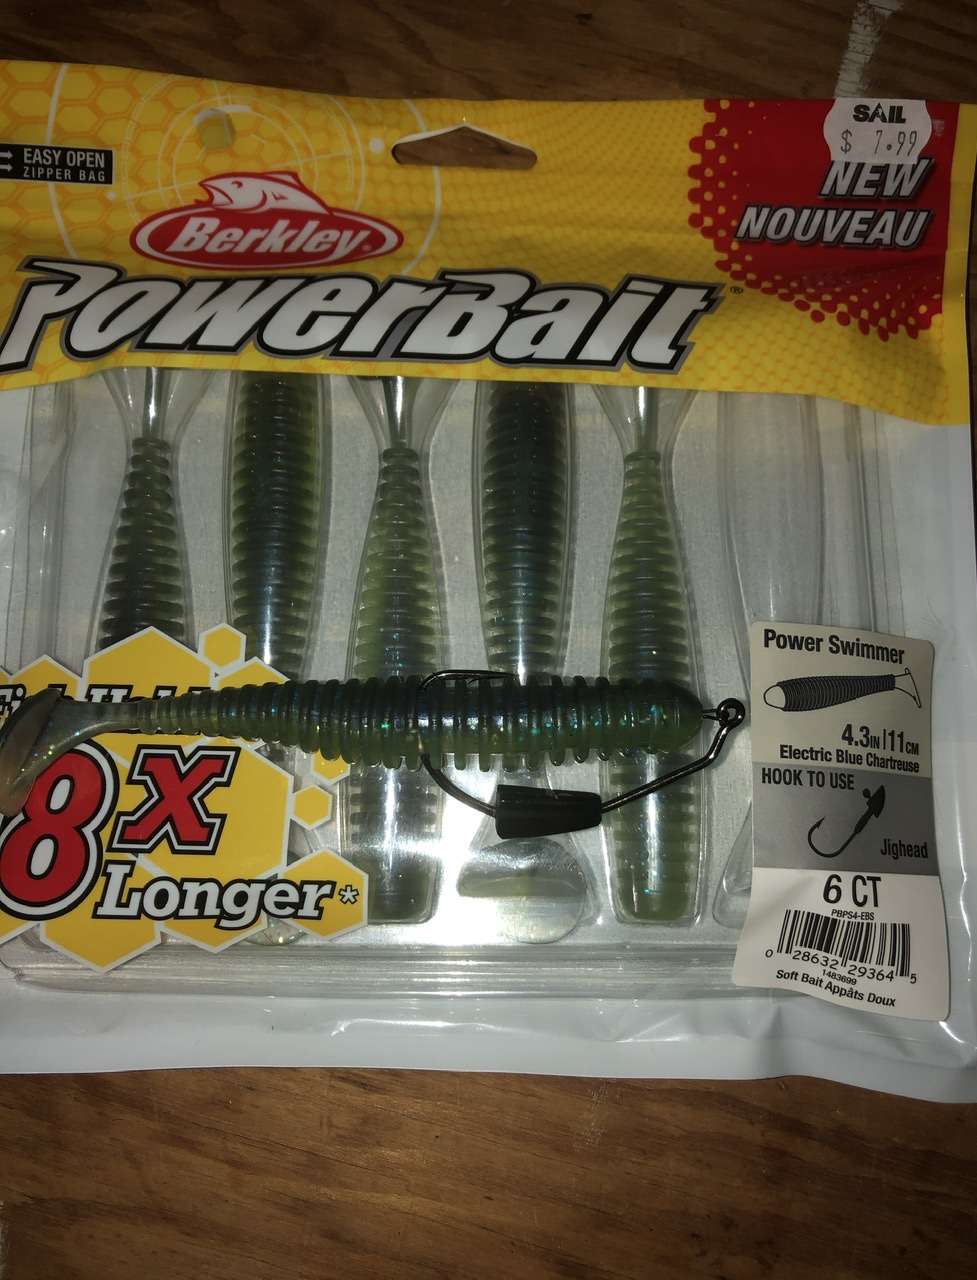 Berkley Power Swimmer Review - Fishing Tackle - Bass Fishing Forums